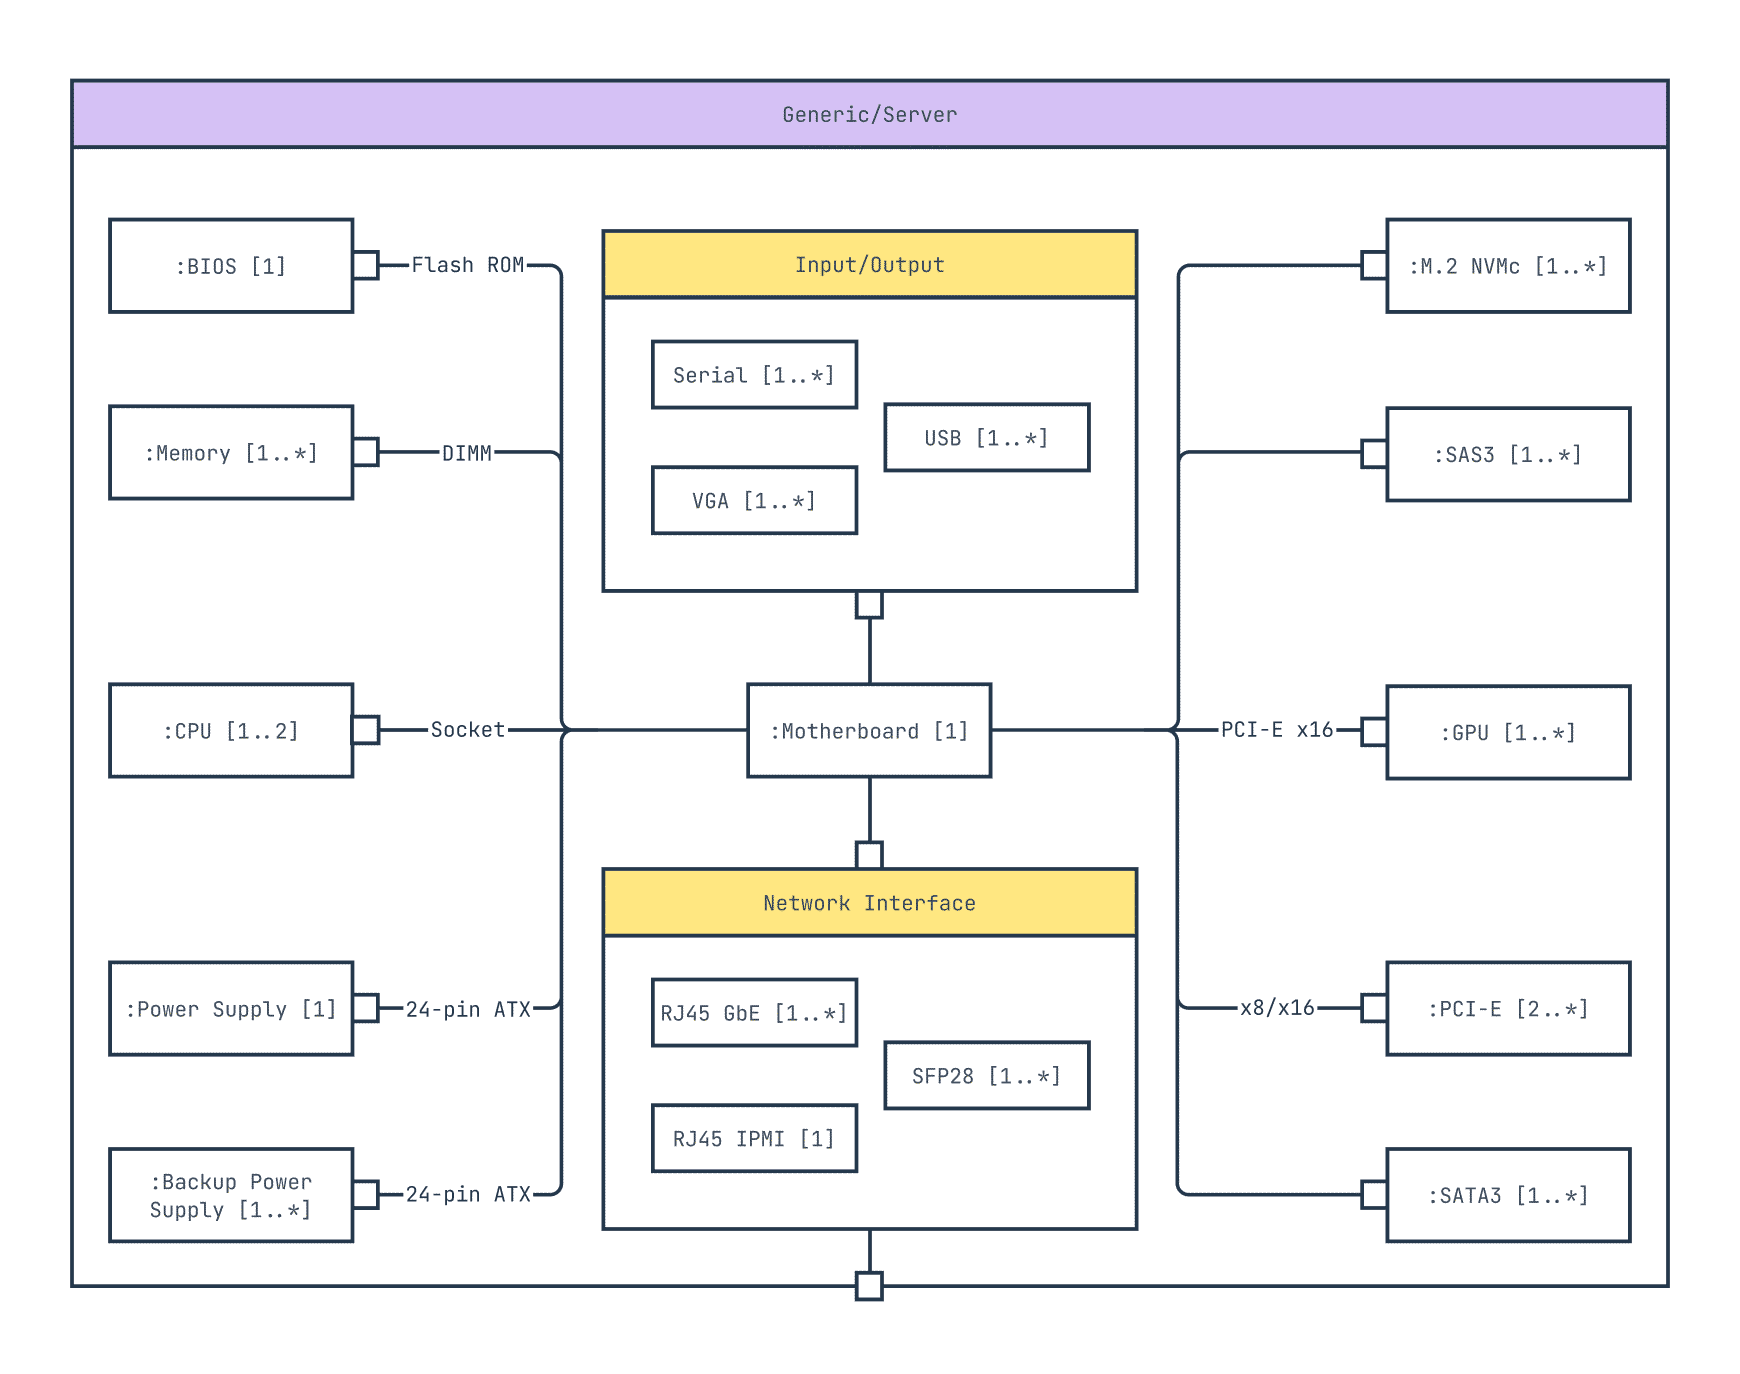 A composite structure diagram of classes within a server